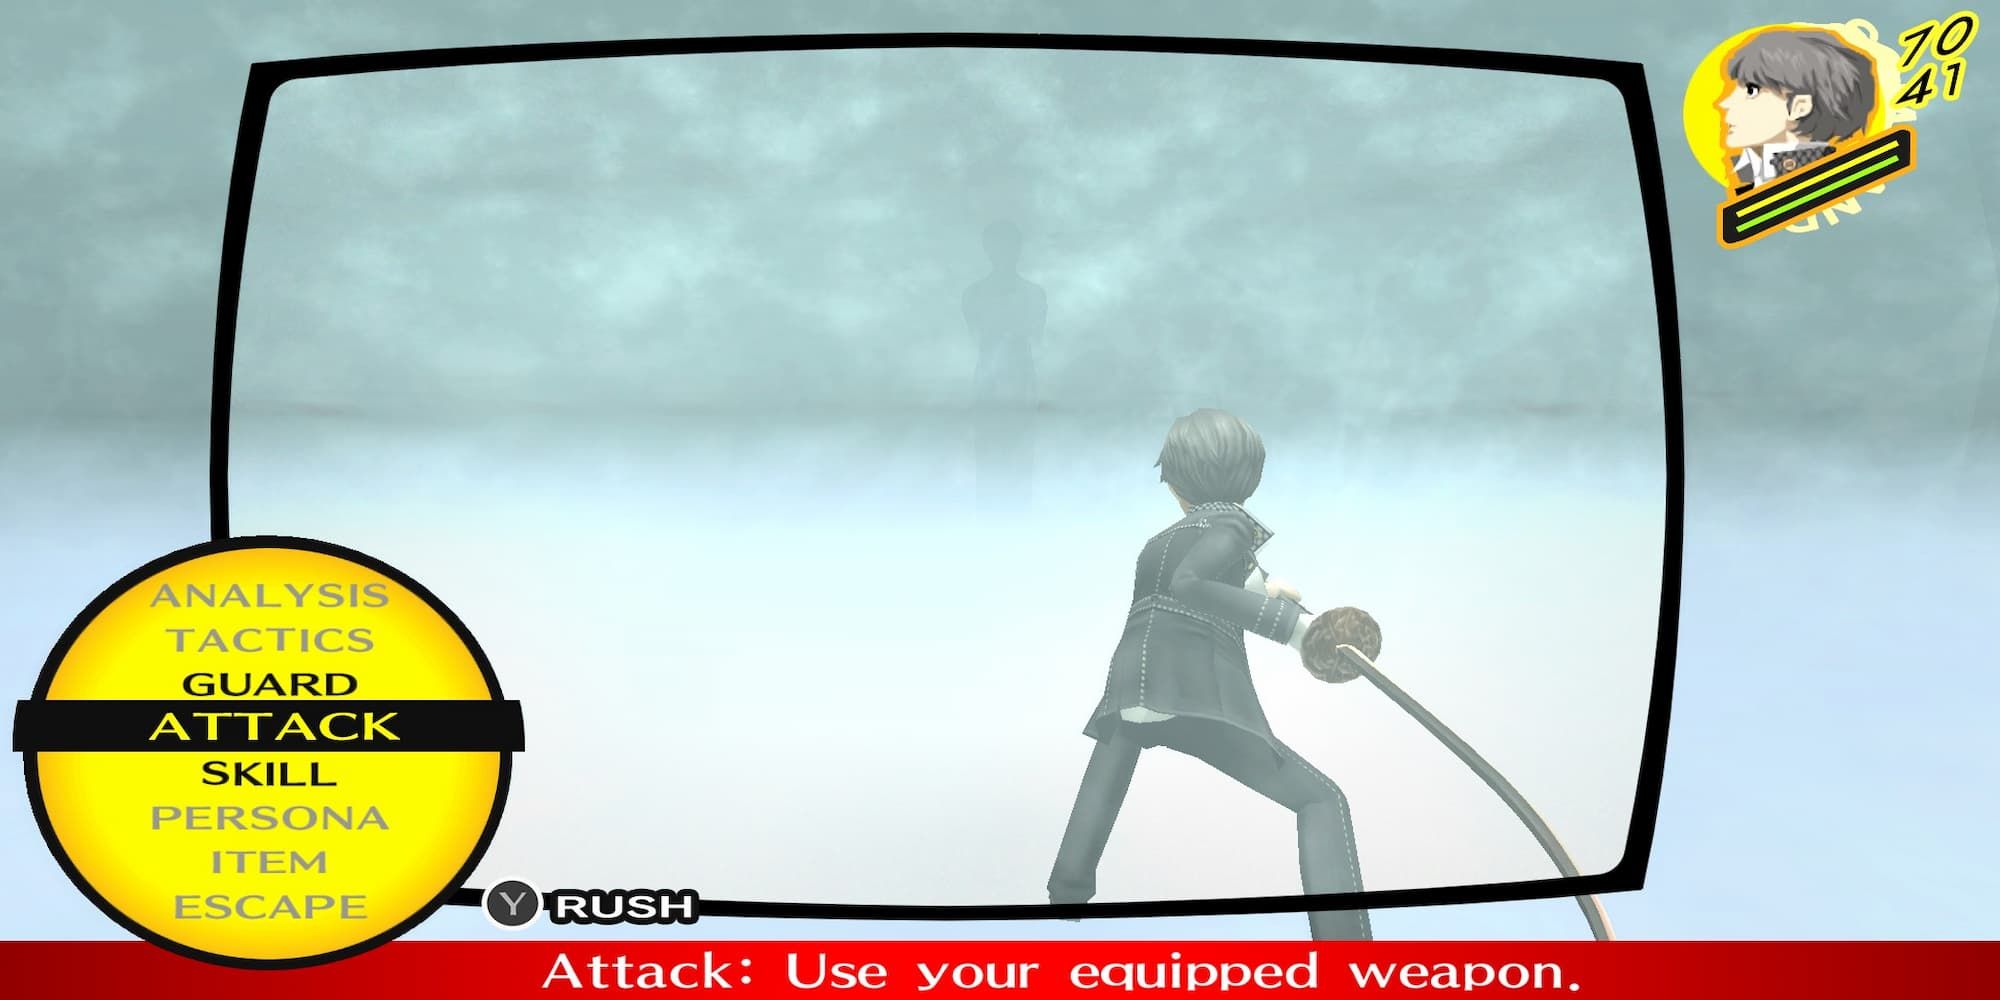 Persona 4 Golden: How To Get The Accomplice Ending